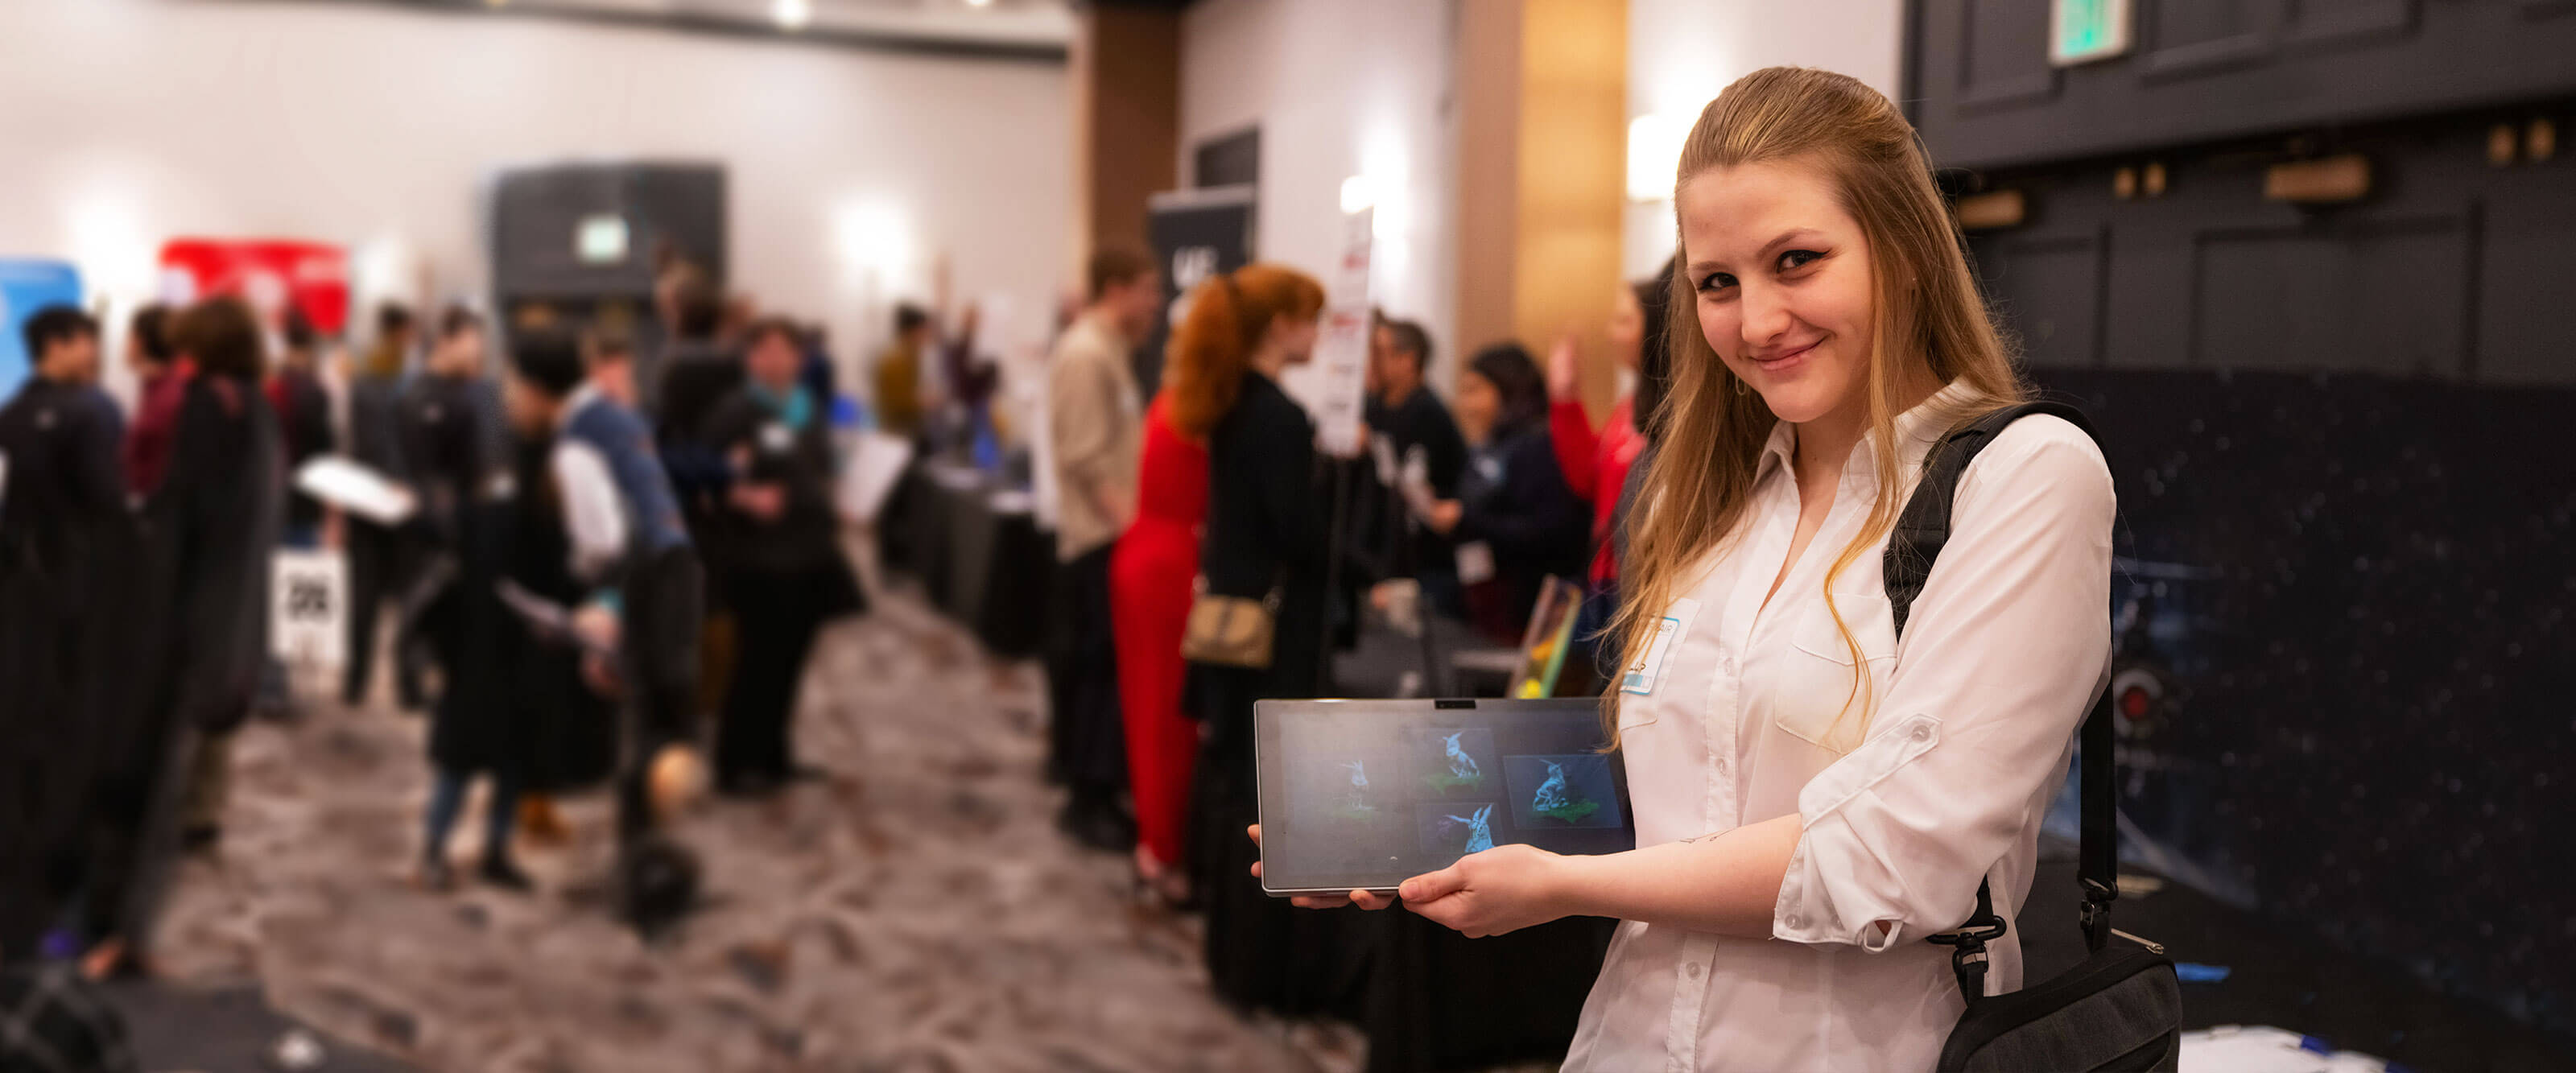 A DigiPen student presents her artwork on a tablet during a busy internship fair.